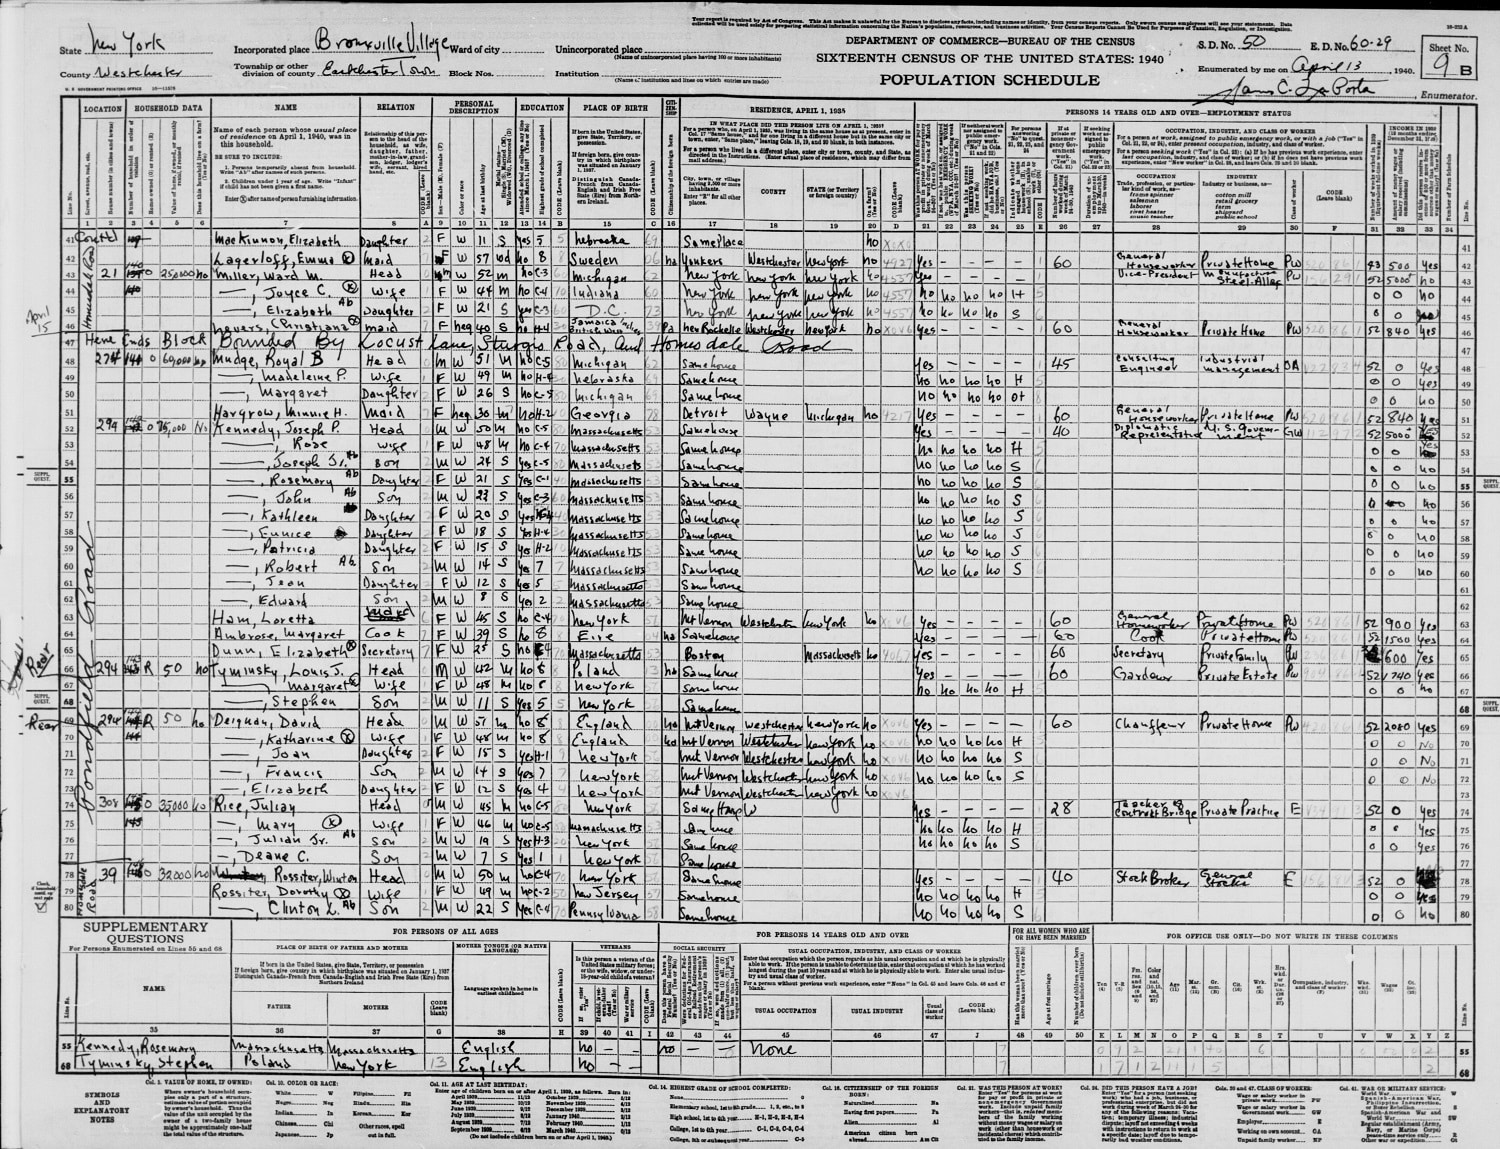 Census record of JFK and family [Credit: MyHeritage 1940 United States Federal Census]